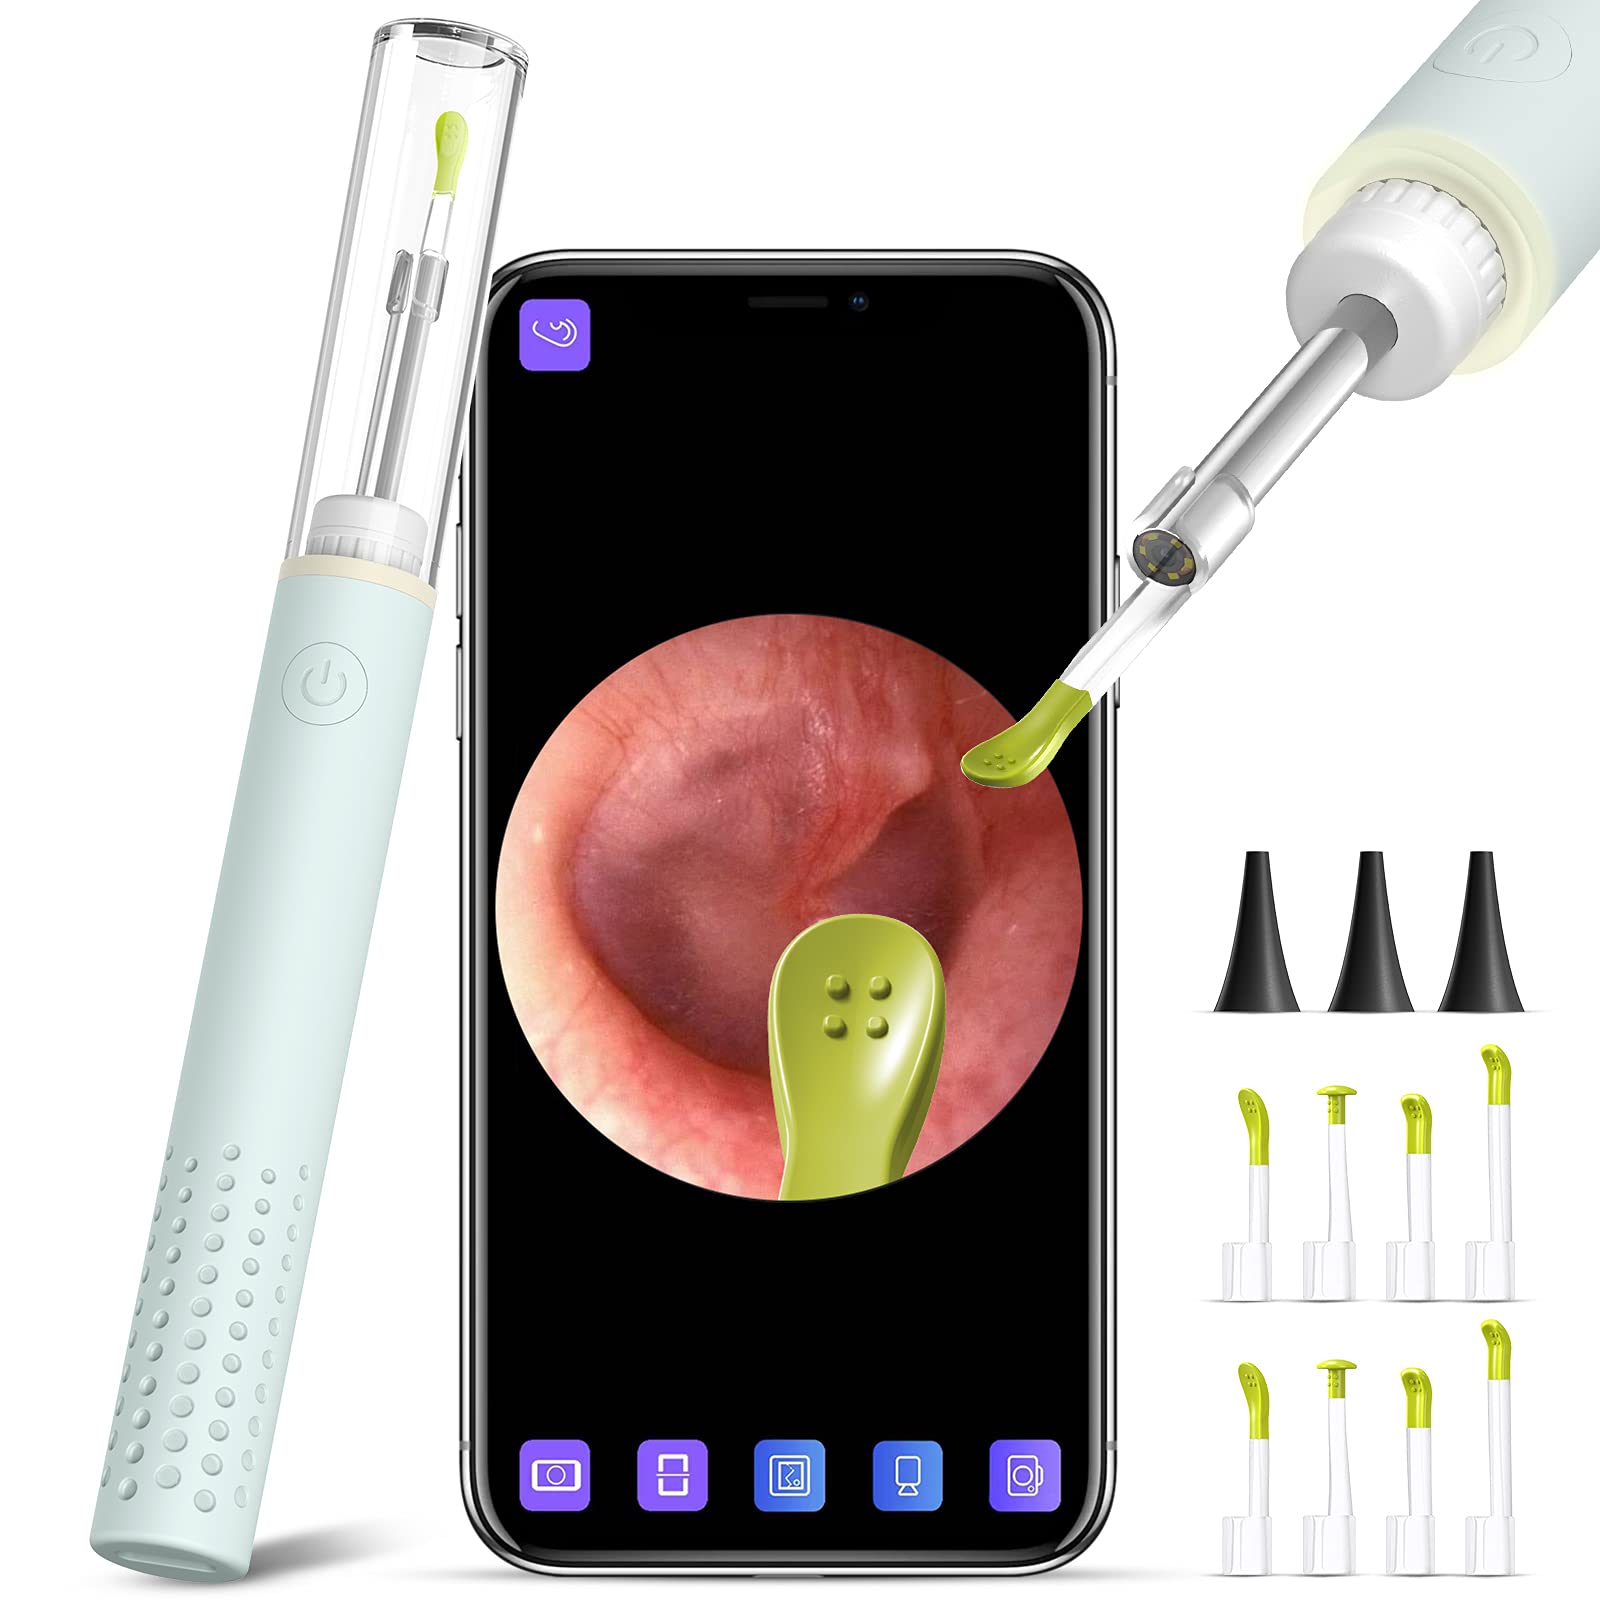 Ear Wax Removal Tools, Otoscope Ear Cleaning Camera,Scopearound